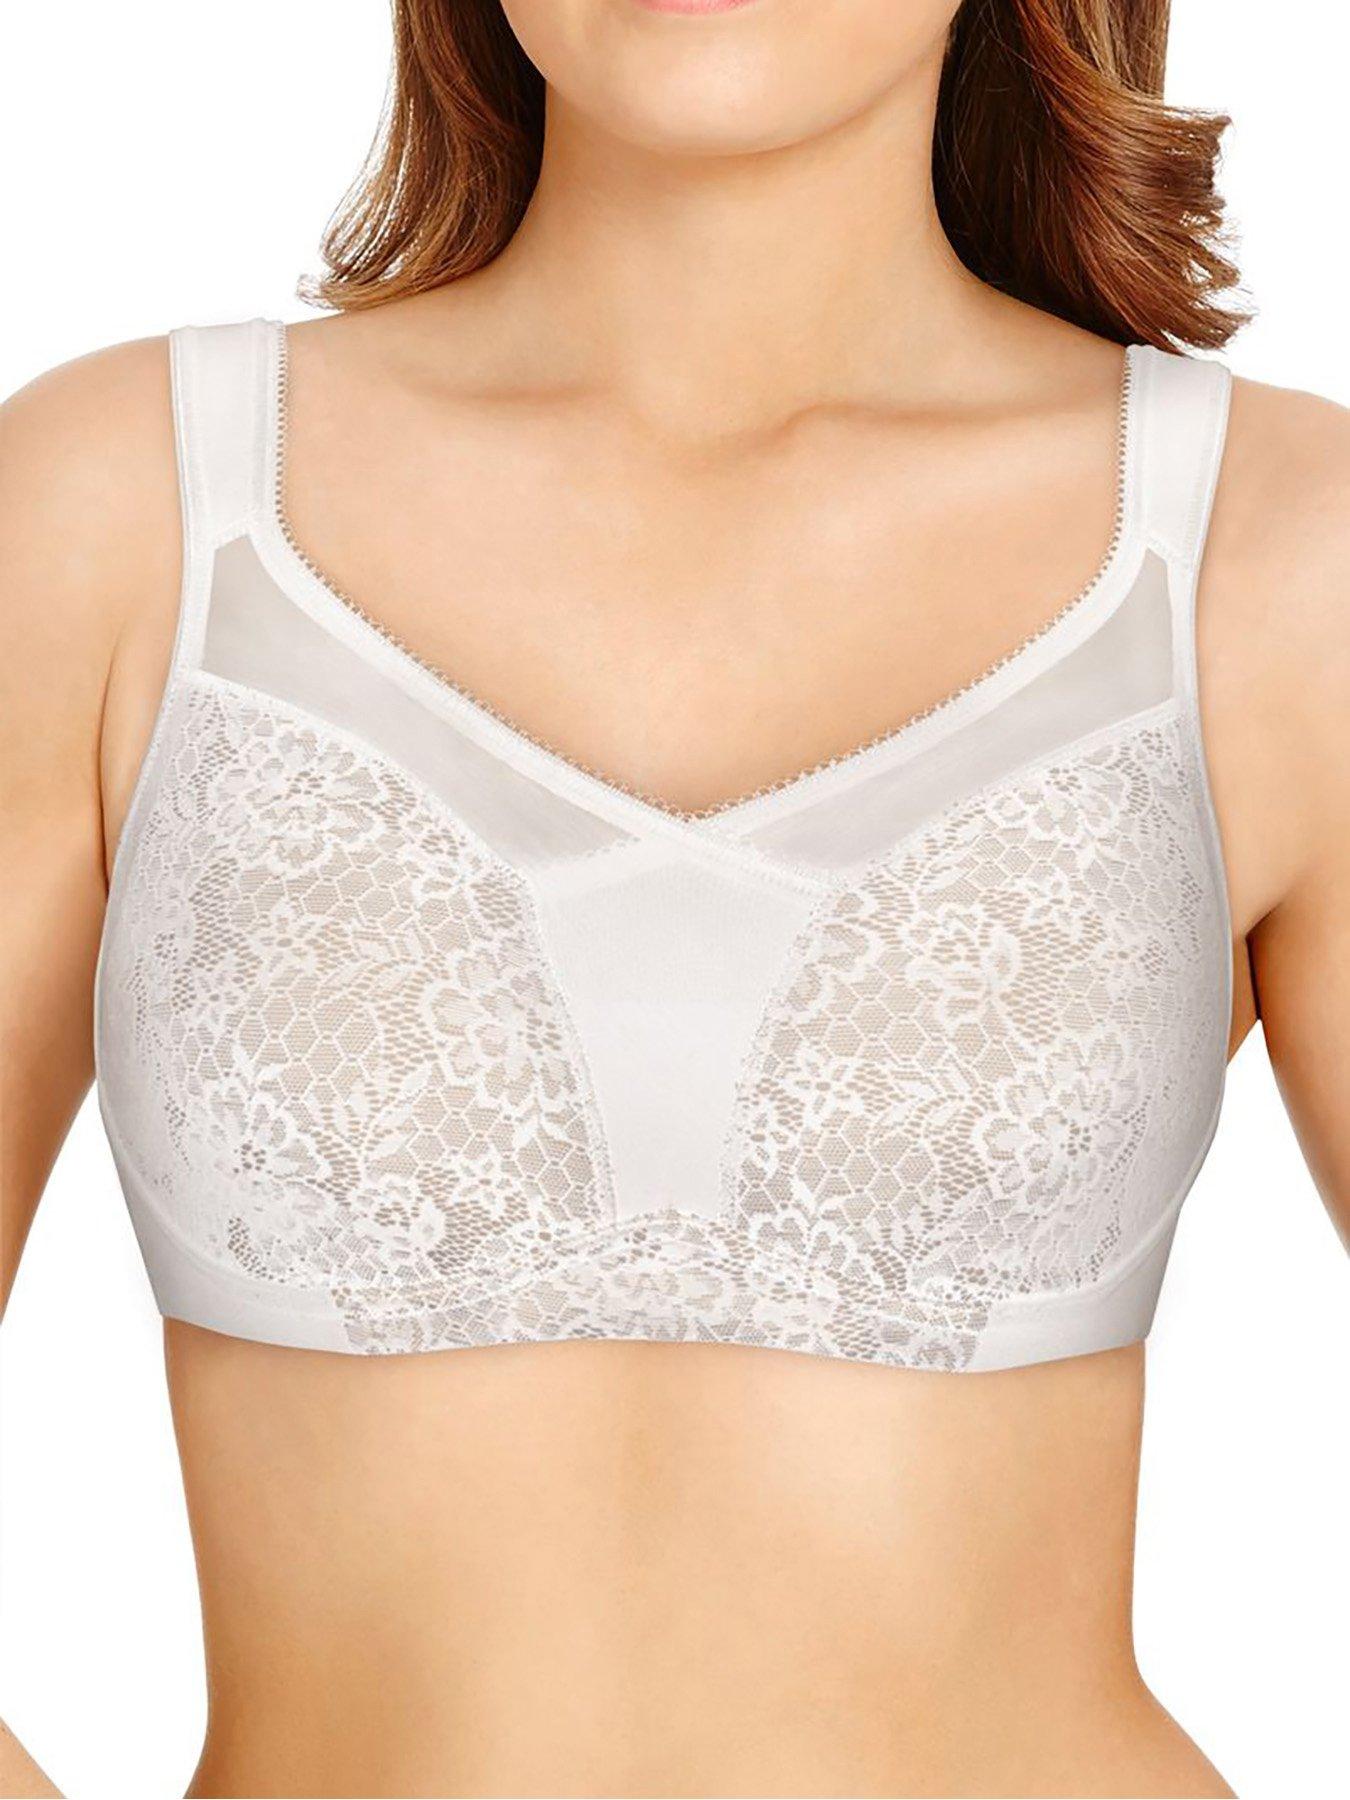 Pour Moi India Eyelash Lace Front Fastening Non-Wired Bralette